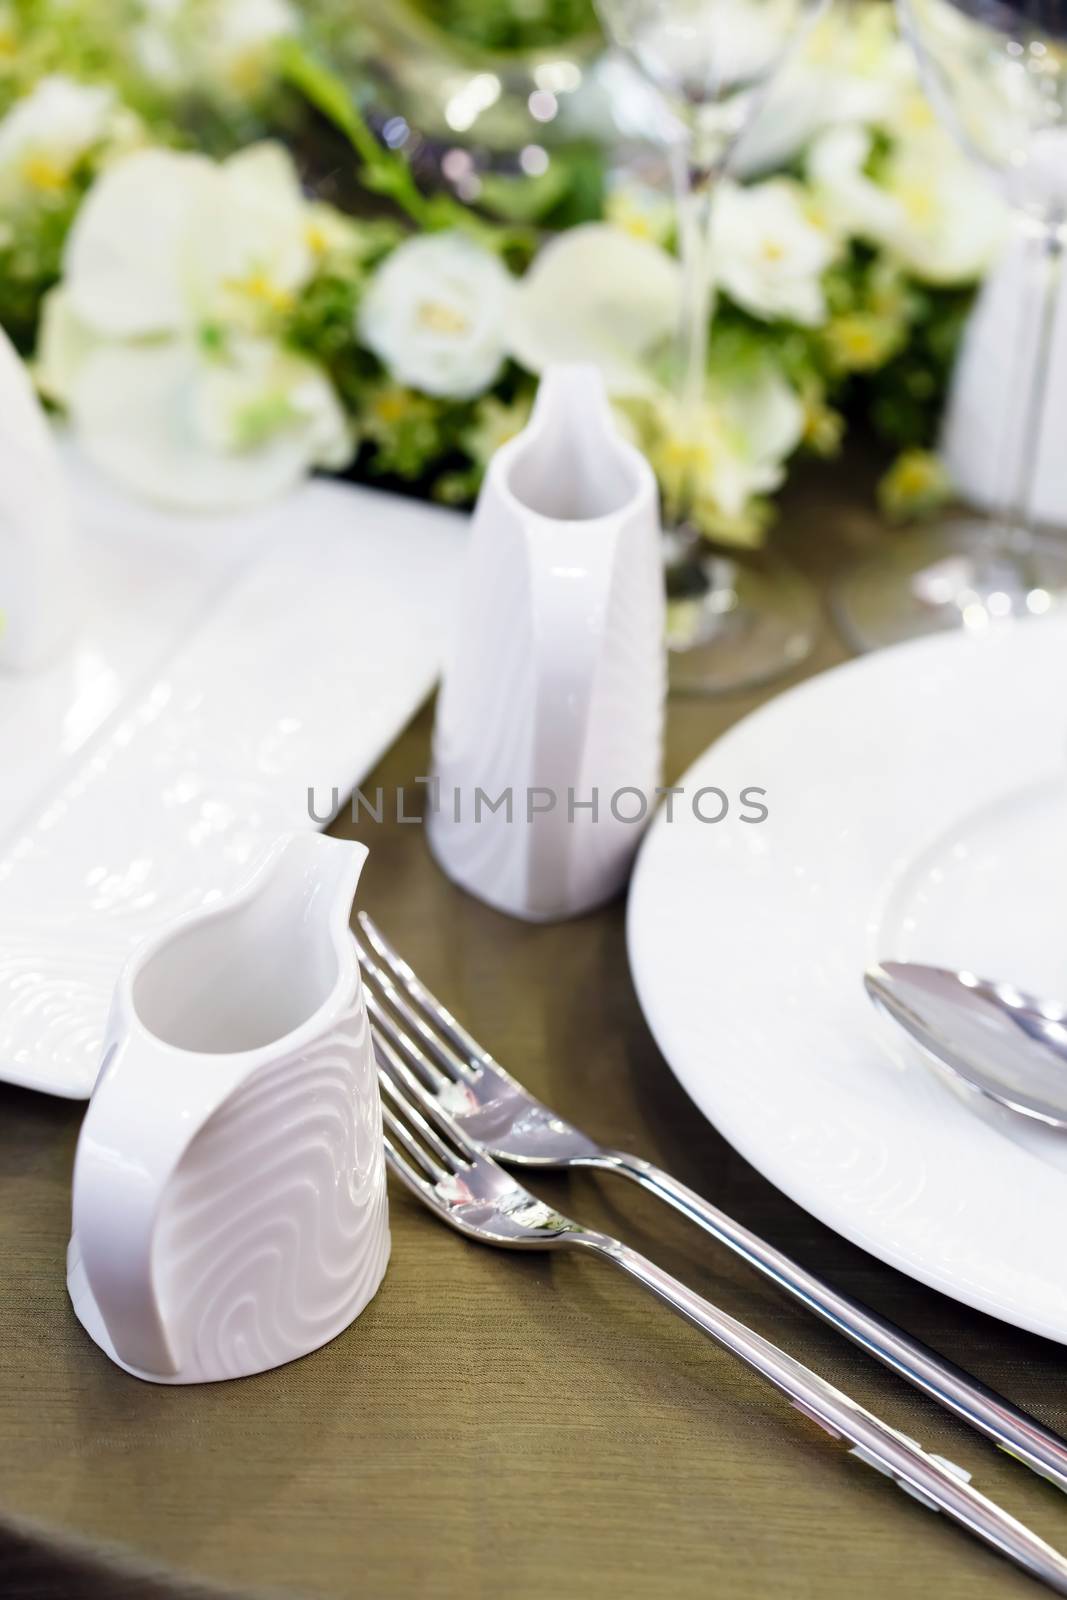 
Ceramic tableware on the table by shebeko